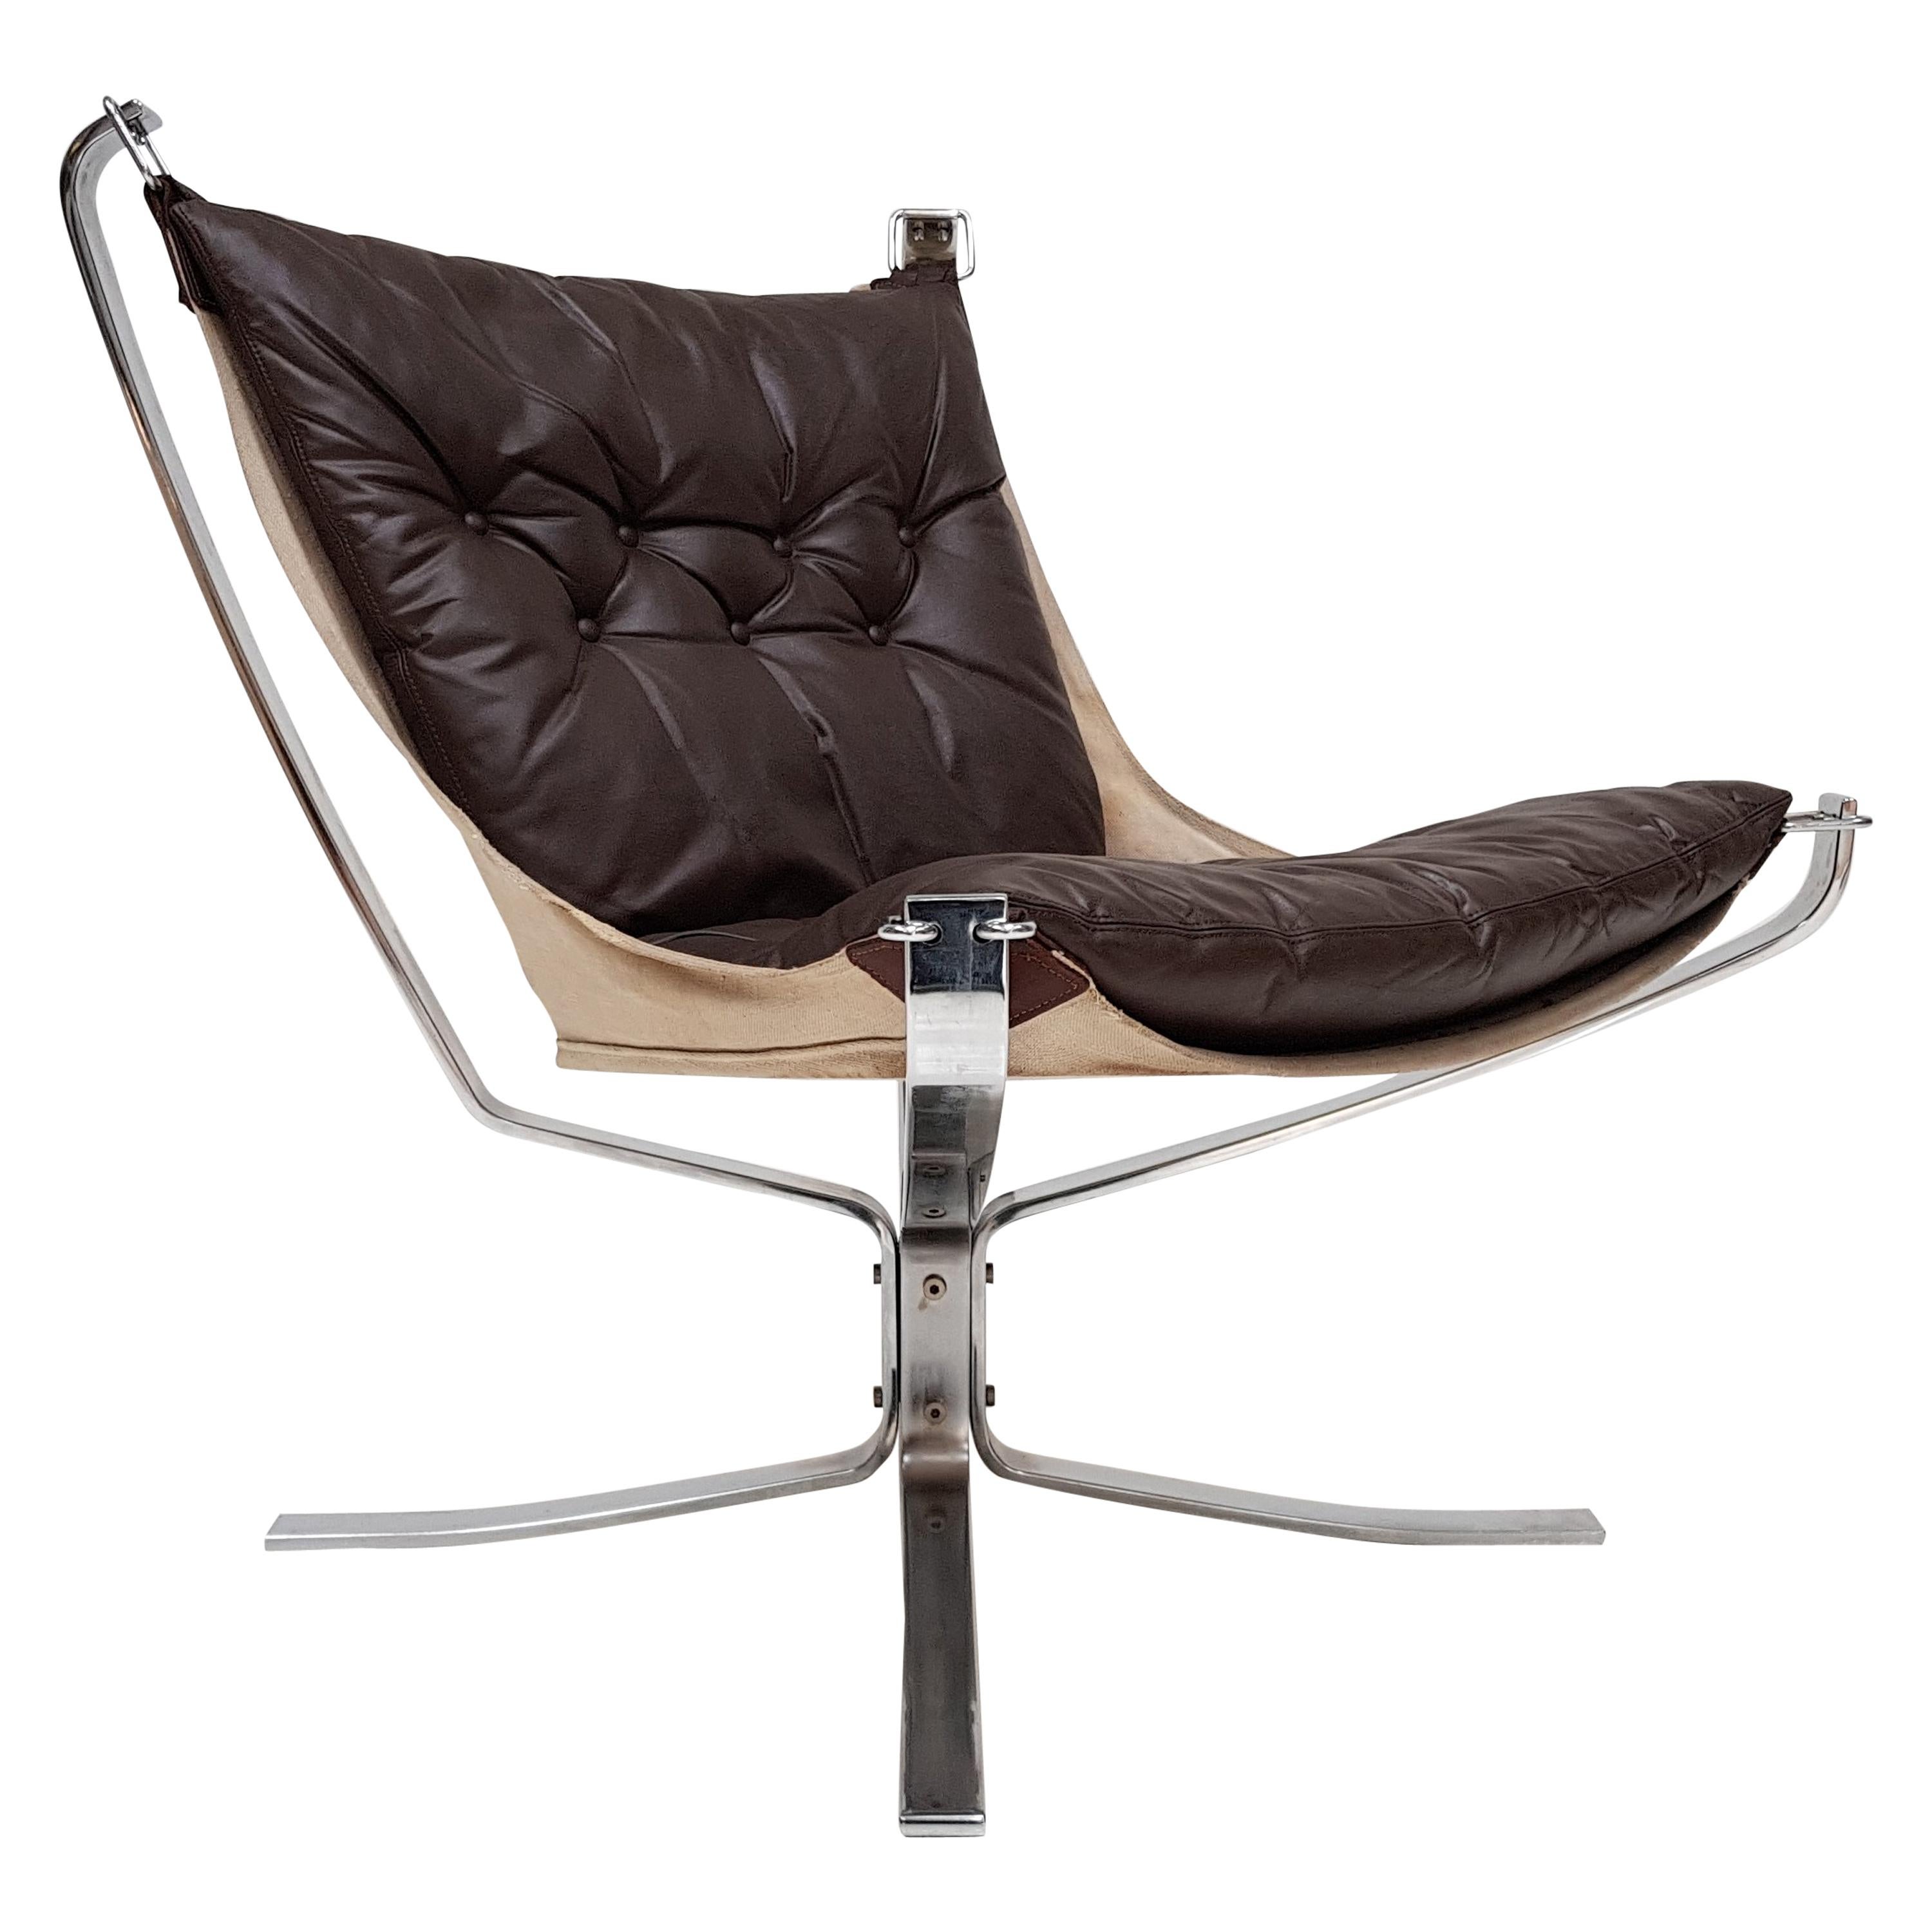 Chrome Based Low-Backed X-Framed Sigurd Ressell Designed 1970s Falcon Chair